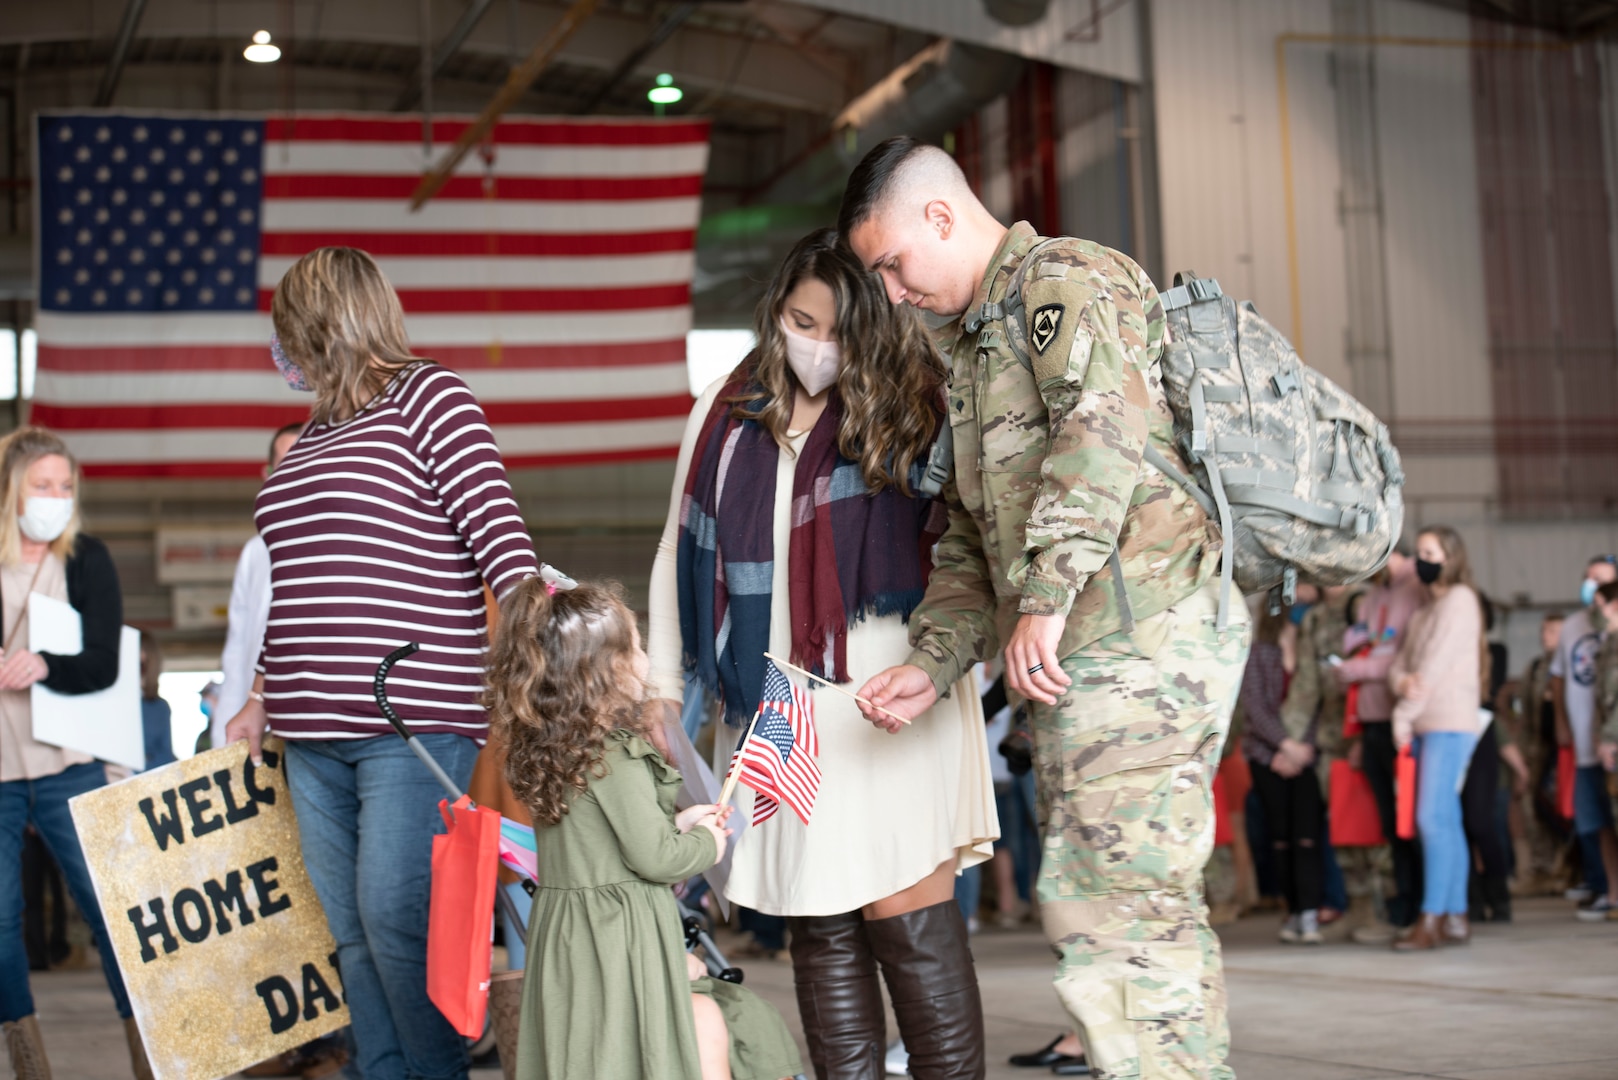 More than 160 members of the 157th Military Police Company, 771st Troop Command Battalion, returned to Martinsburg, West Virginia, Oct. 24, 2020, from a nine-month deployment to Guantanamo Bay, Cuba. While deployed, they provided support for Joint Task Force – Guantanamo in its safe, legal and humane detention mission. (U.S. Air National Guard photo by Staff Sgt. Timothy Sencindiver)